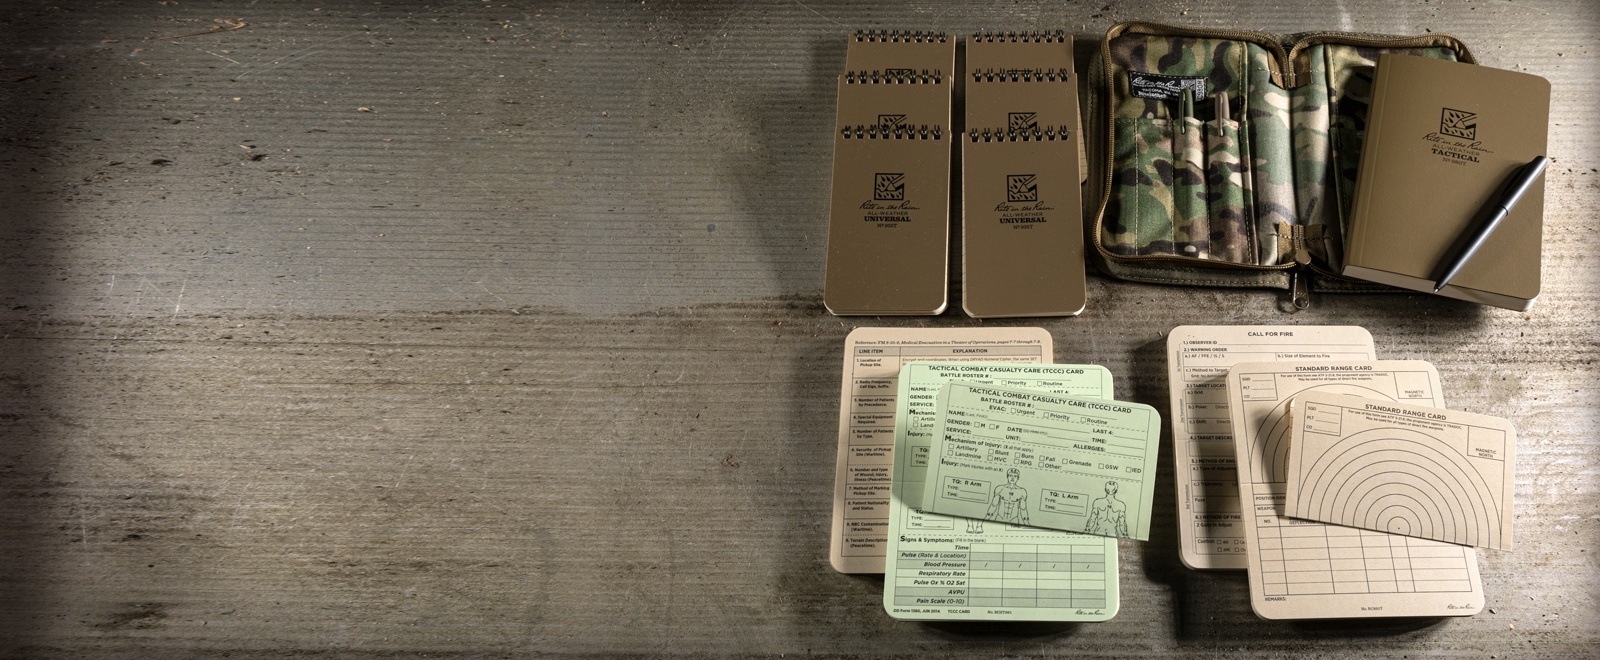 Kit includes: 6 top spiral notebooks,3 all weather pens, tactical field book, book cover, and combat cards. 